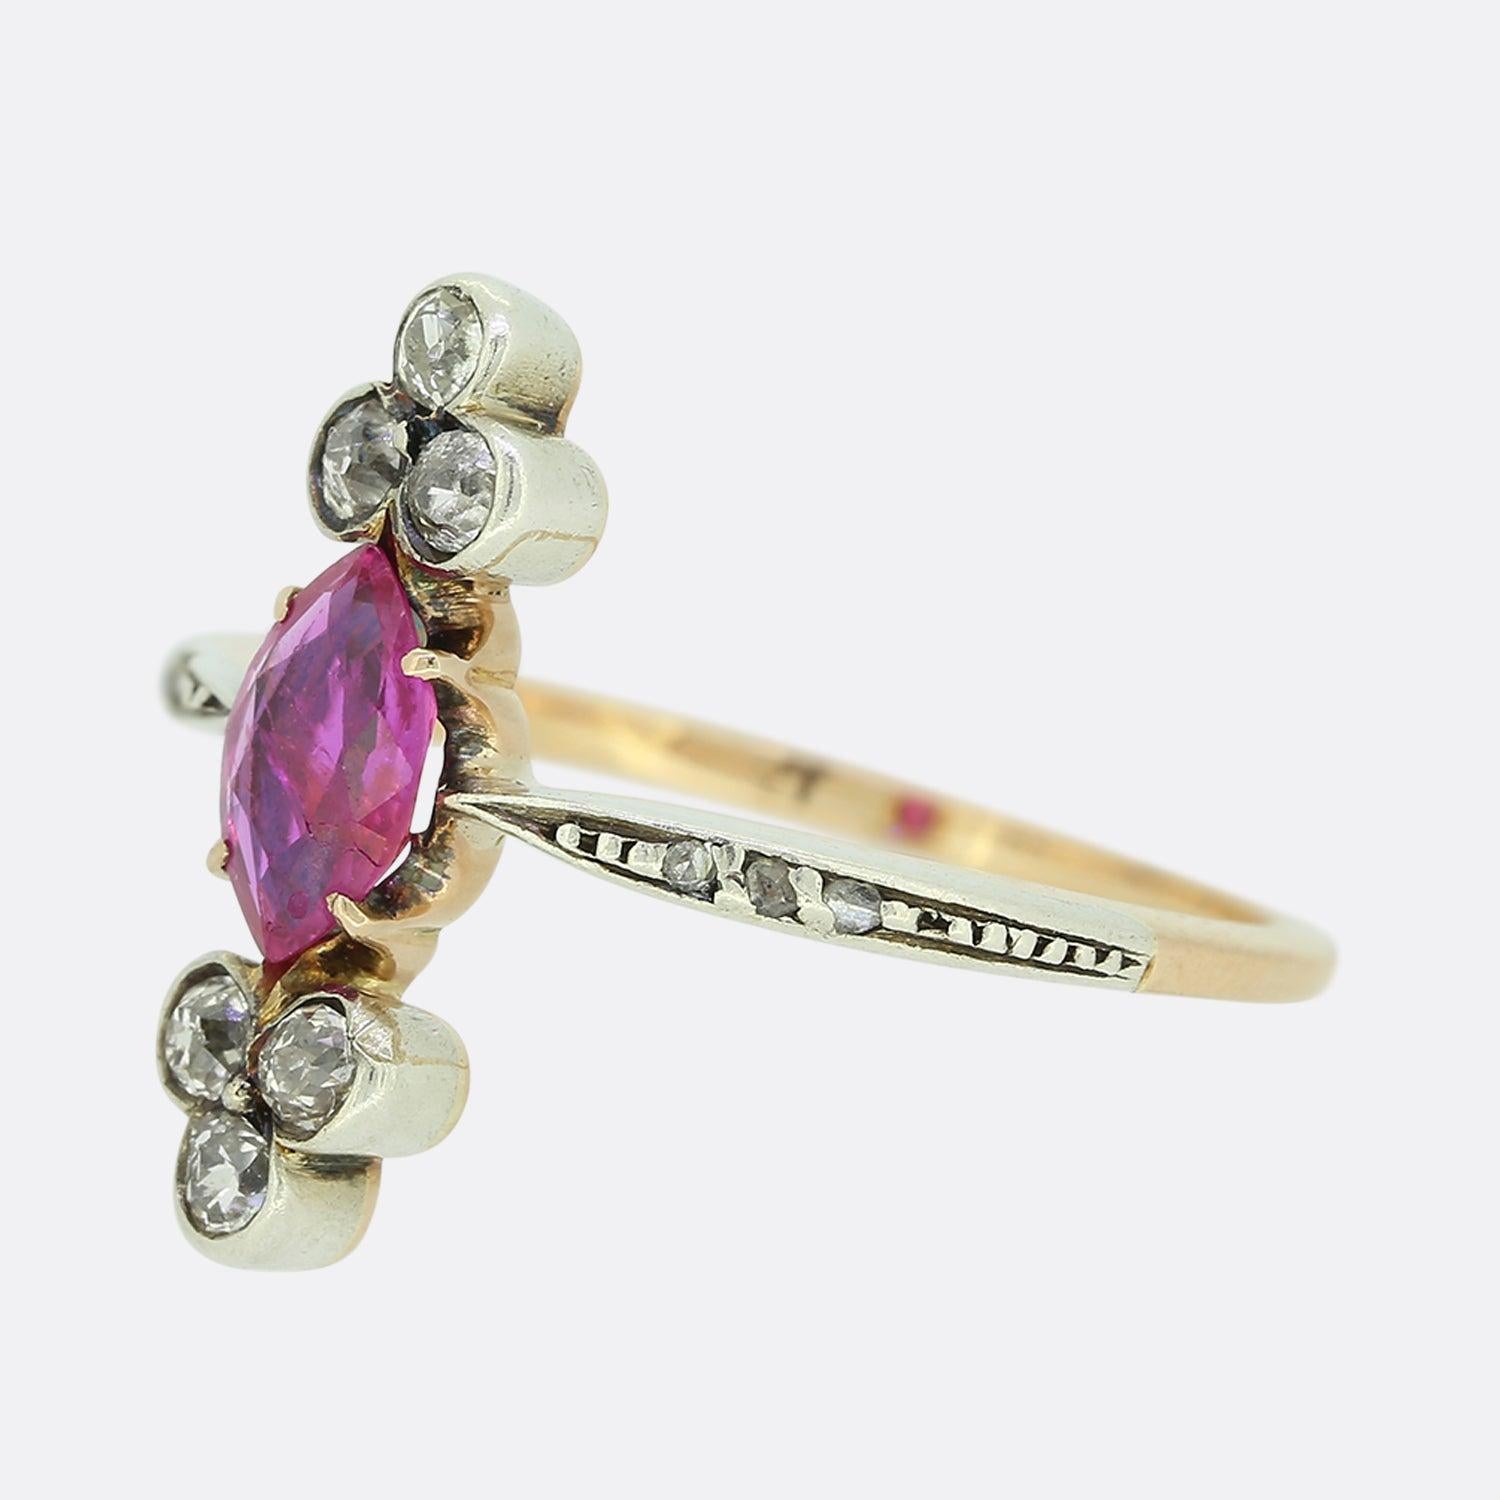 Here we have a wonderful ruby and diamond navette ring dating back to the Victorian era. The ring's face showcases a central marquise cut ruby with three old cut diamonds set above and below and crafted in 18ct yellow gold and platinum. The ruby is